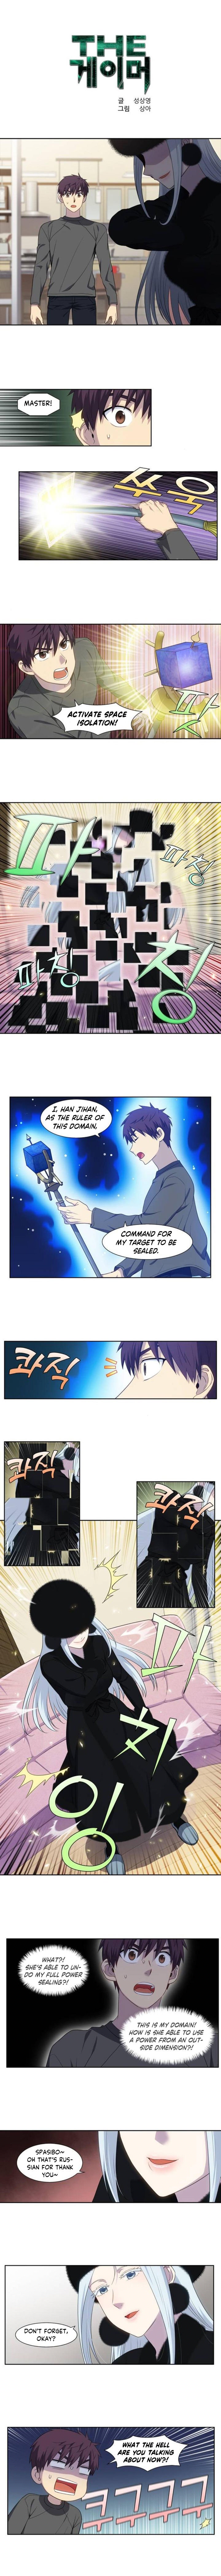 the-gamer-chap-360-1